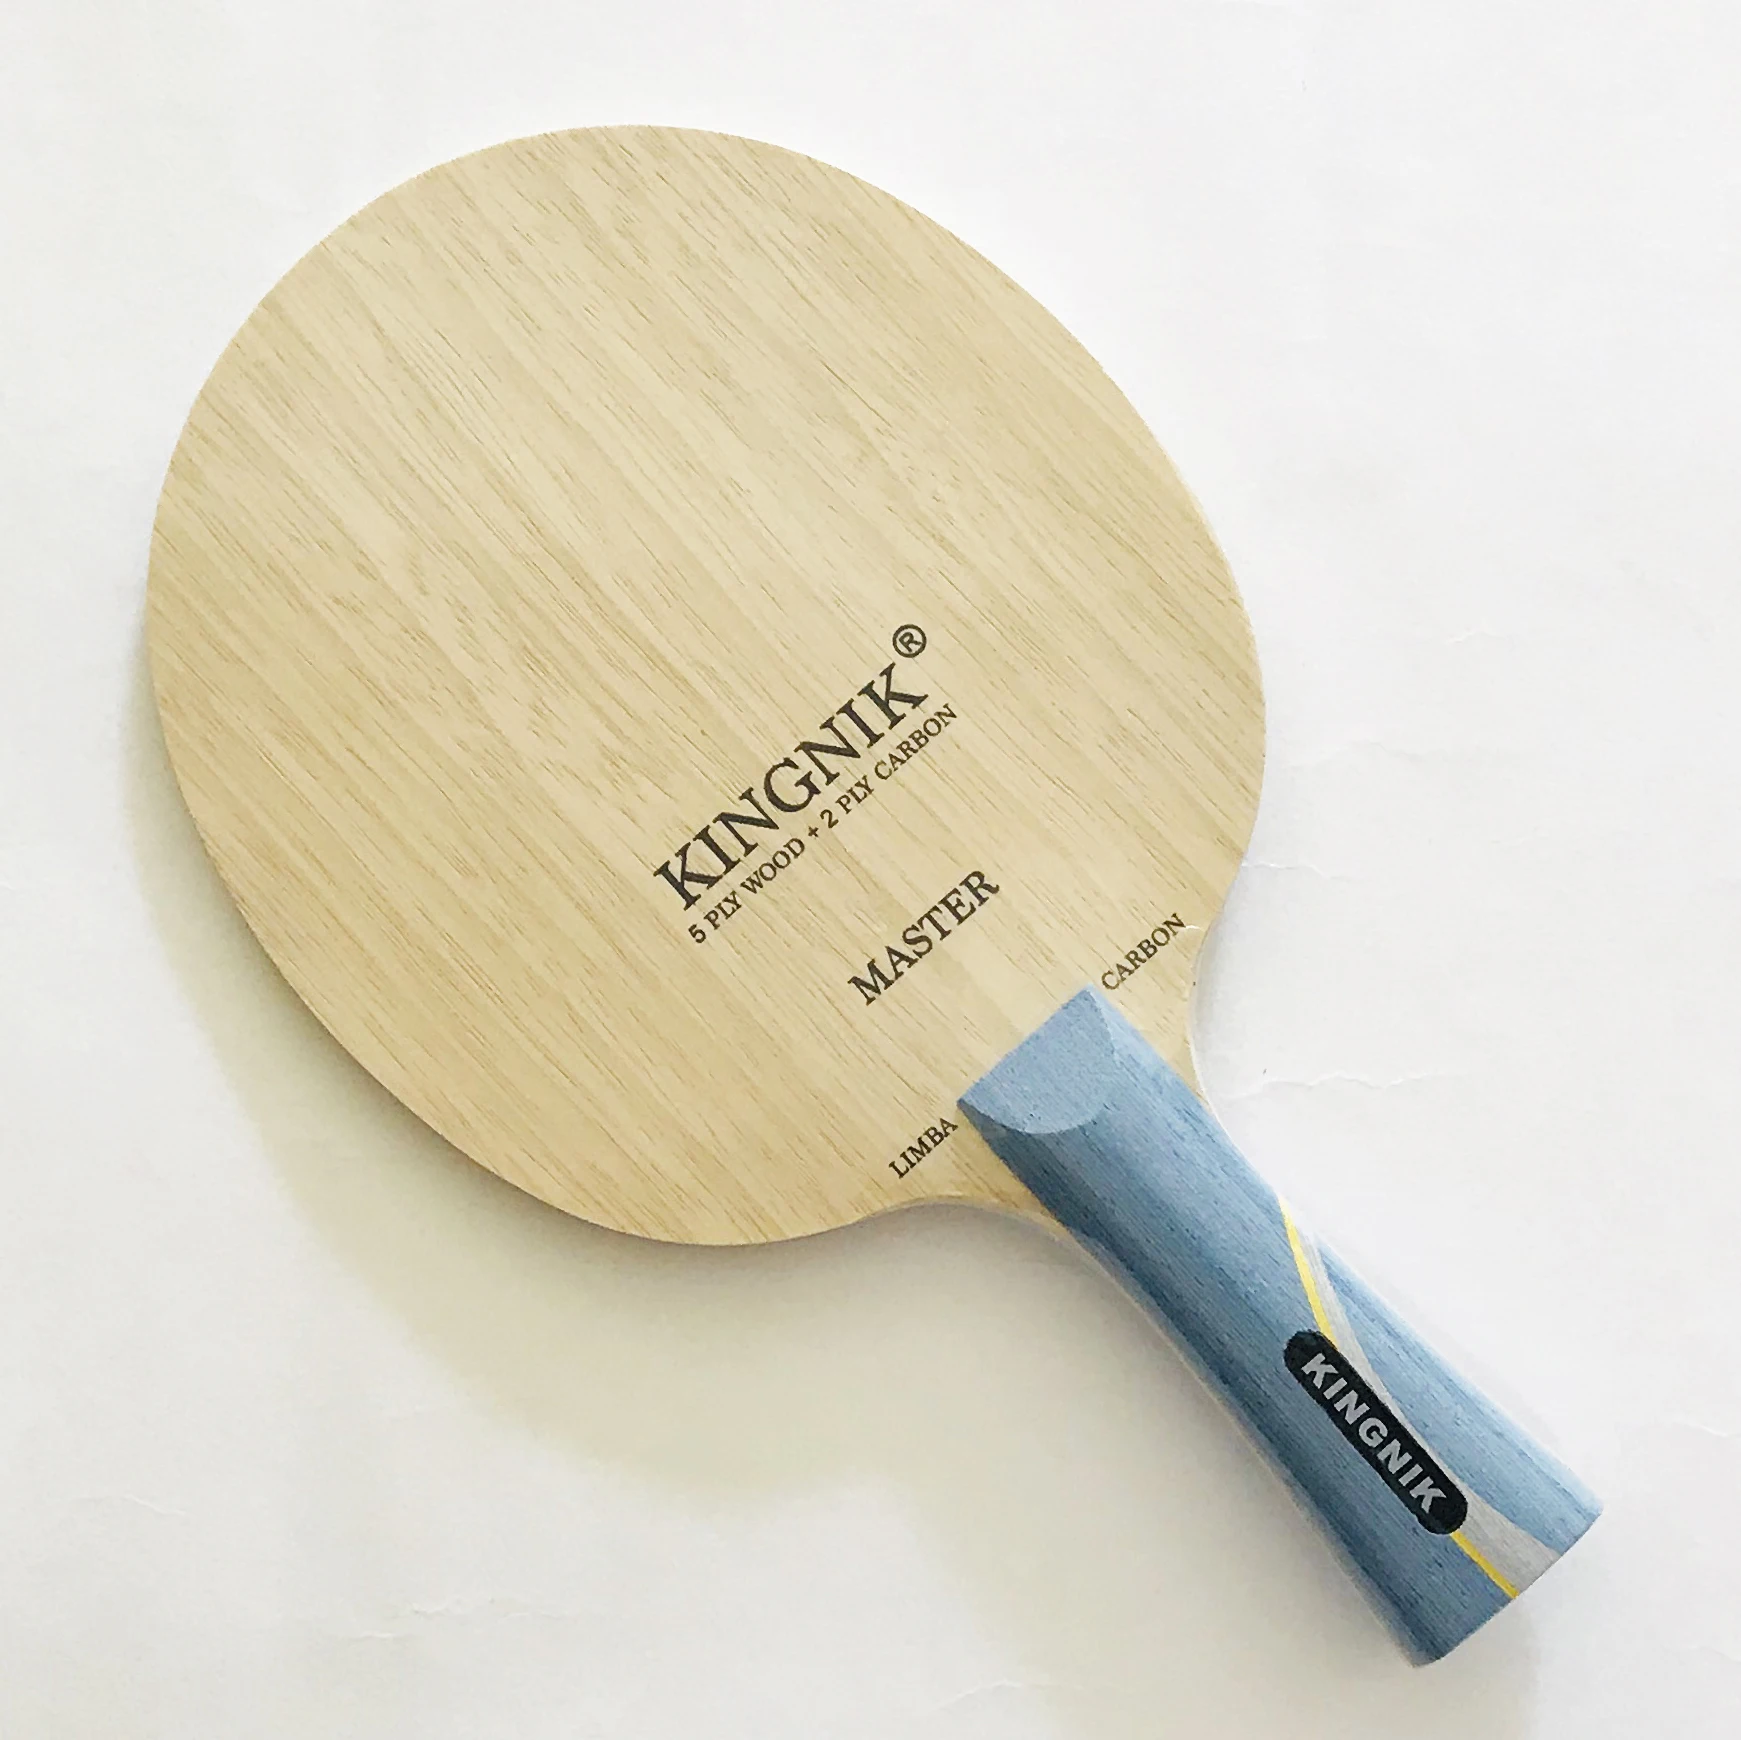 5 Ply wood & Arylate Carbon Kingnik Master Table Tennis Blade